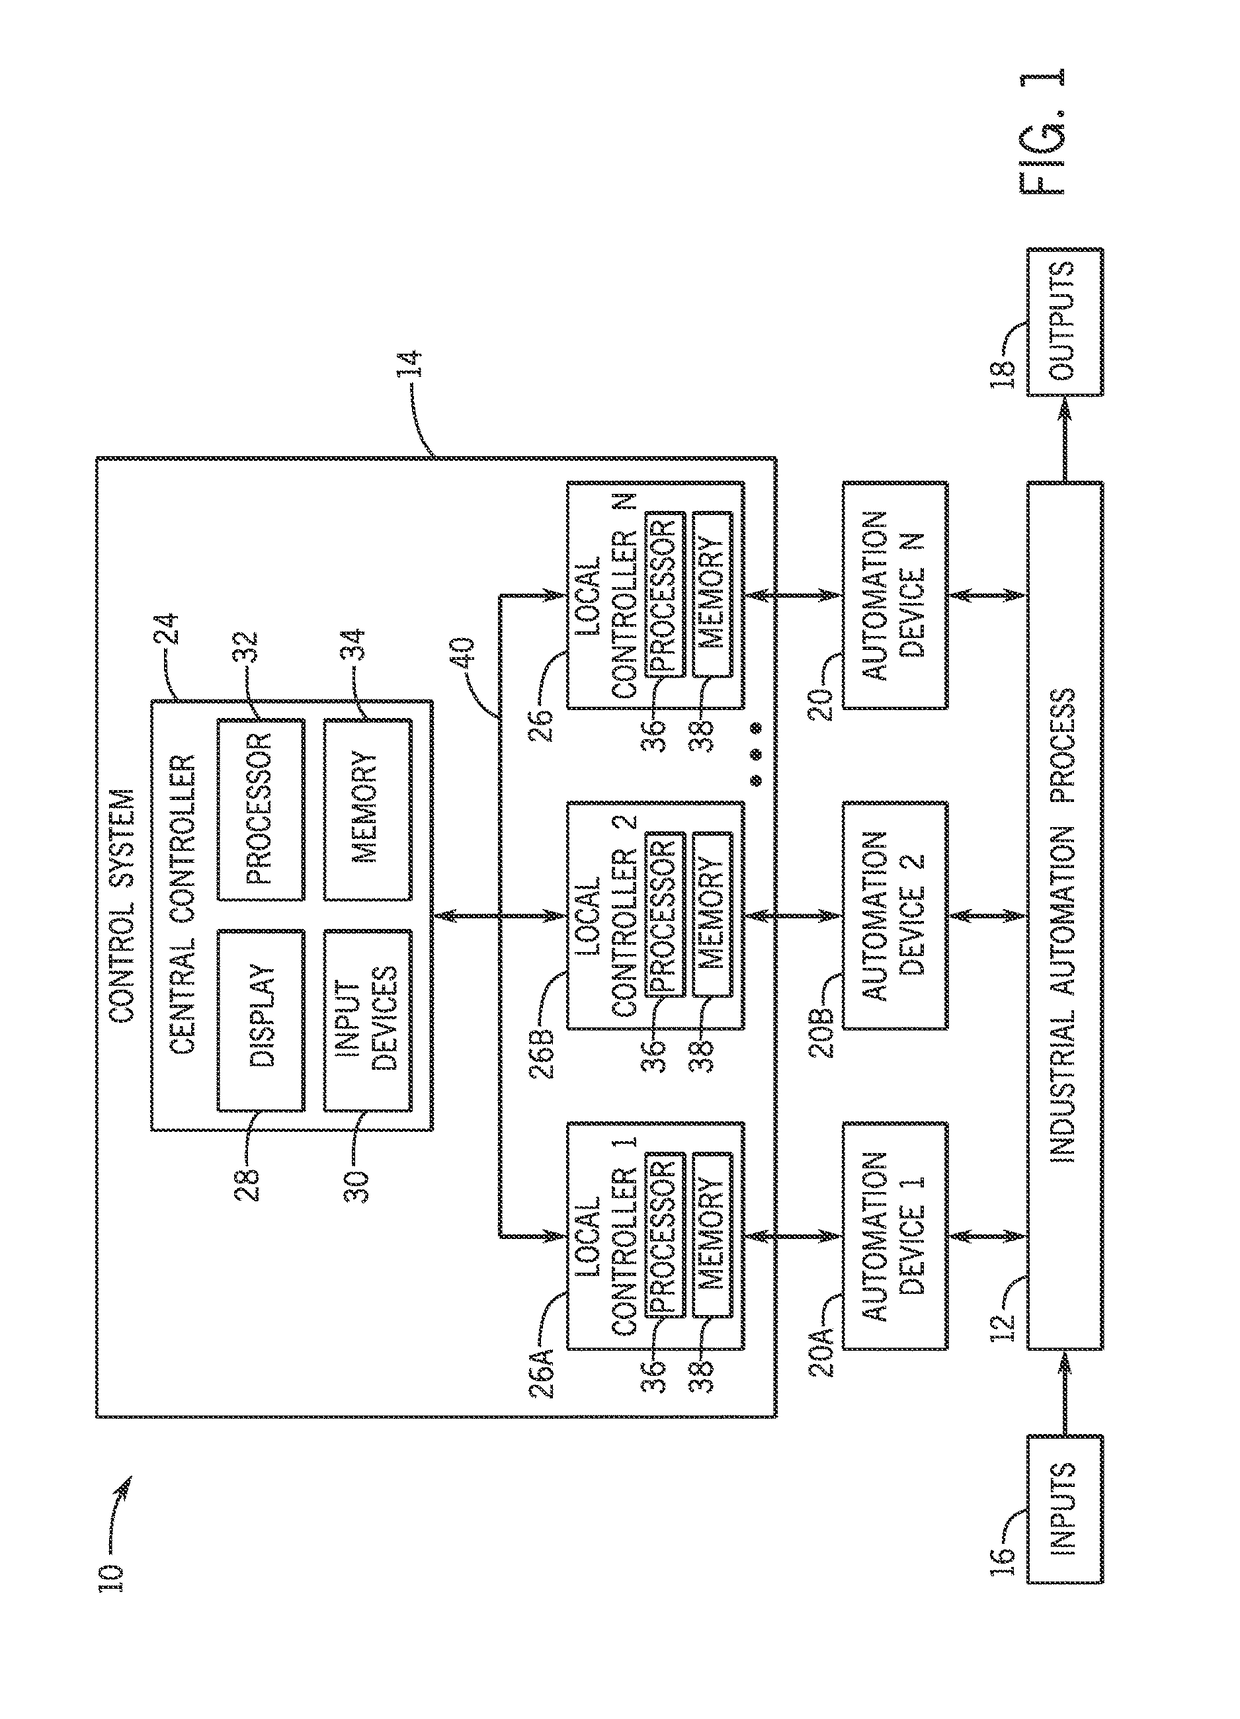 Predictive monitoring and diagnostics systems and methods